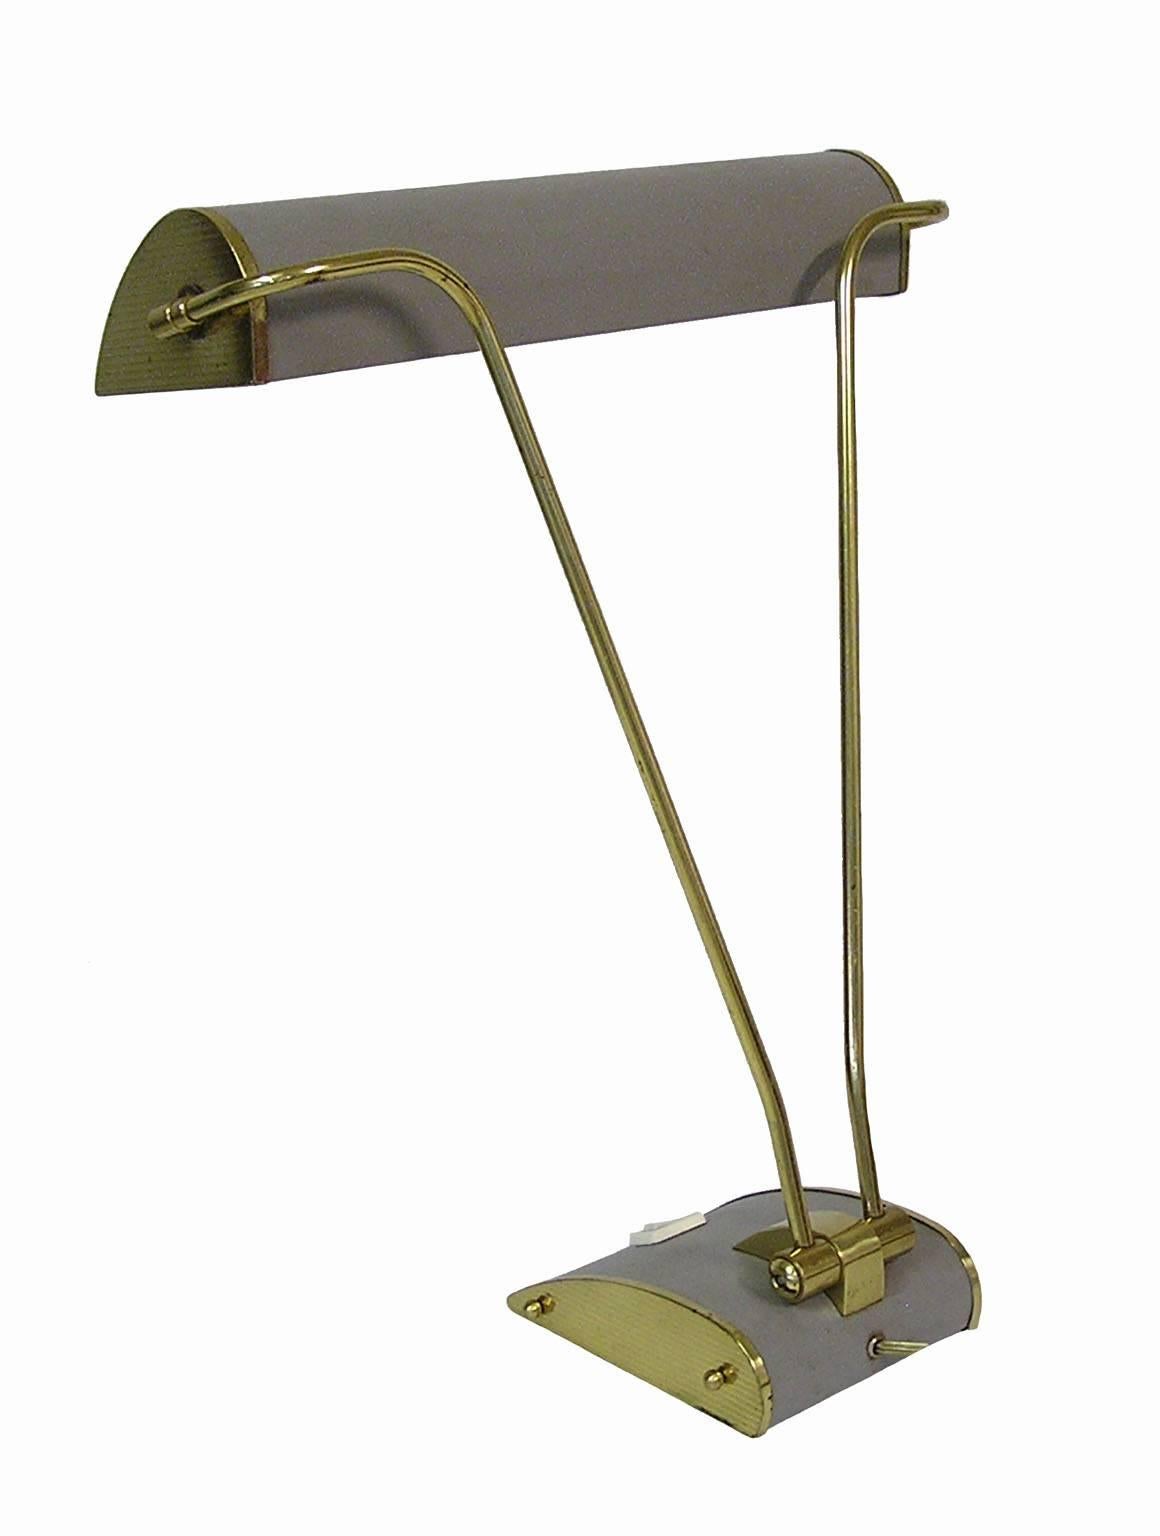 French 1940s Art Deco Desk Lamp by Eileen Gray for Jumo, France For Sale